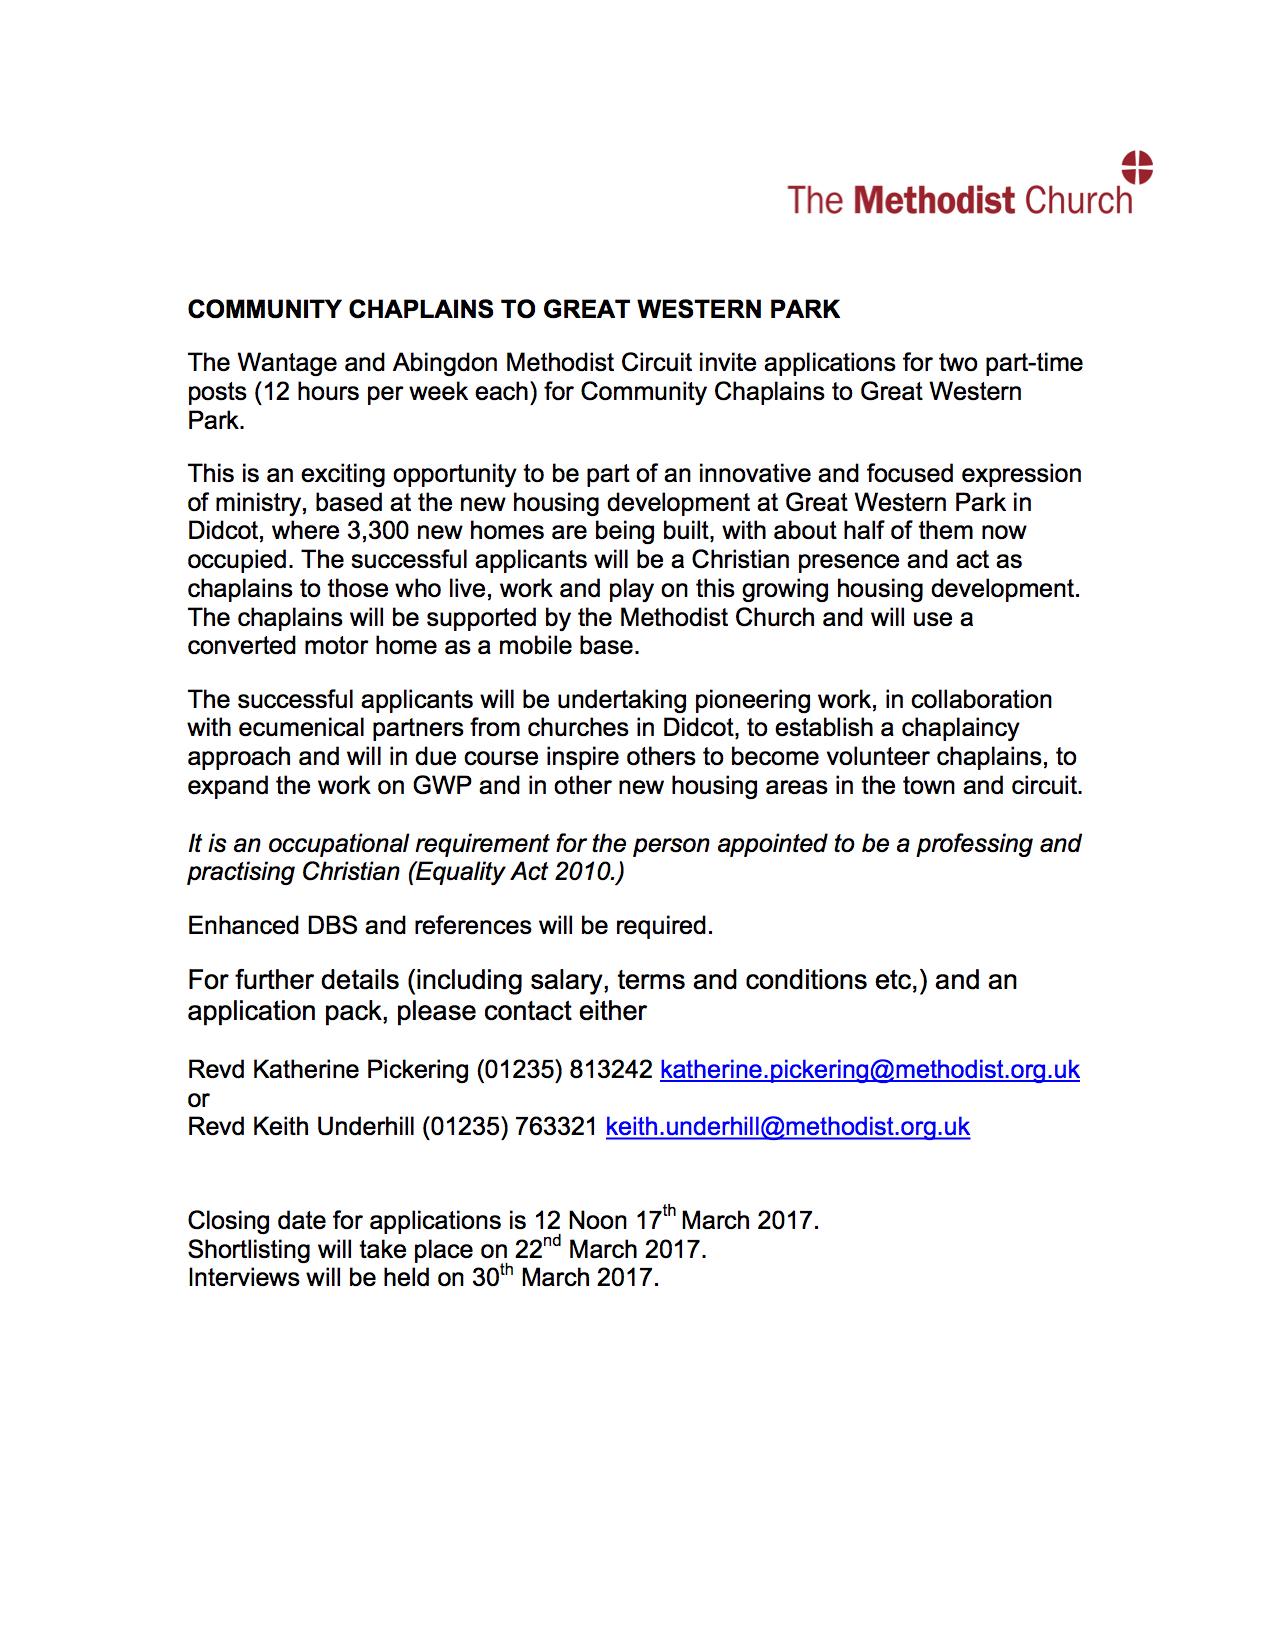 Advert - COMMUNITY CHAPLAINS TO GREAT WESTERN PARK